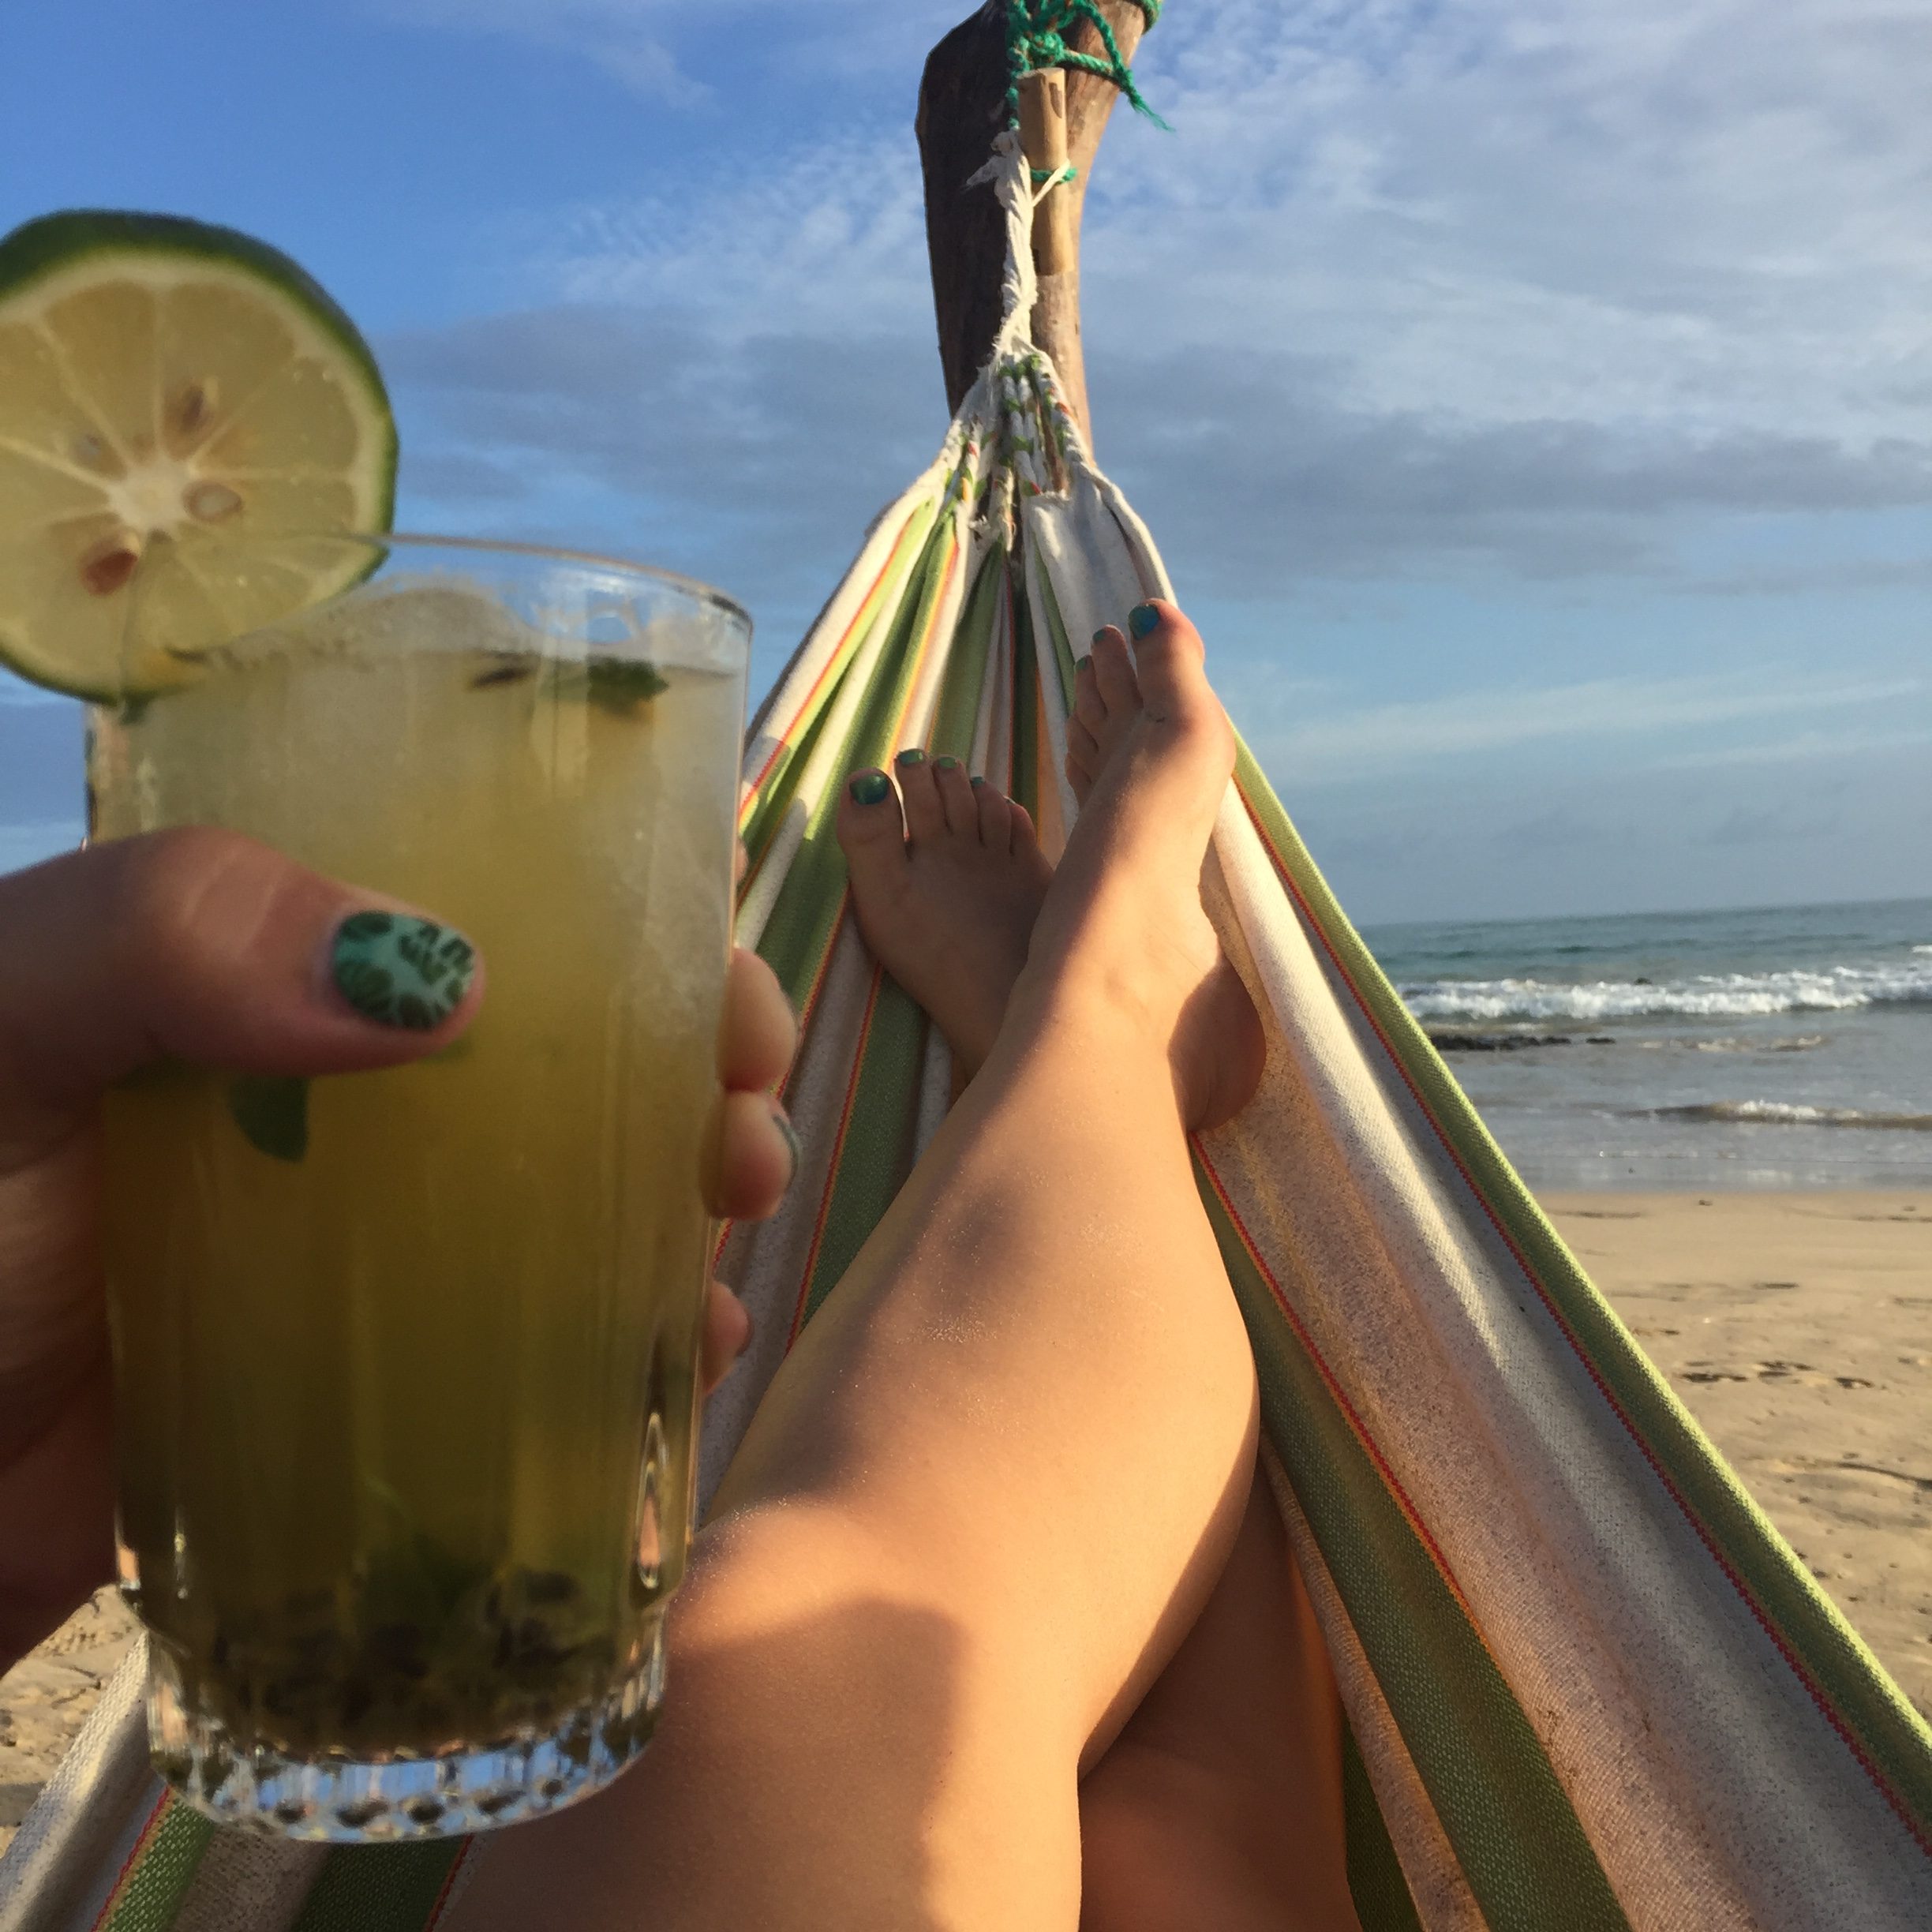 Fresh passion fruit mojitos served to me in a hammock on Isla Isabela in the Galapagos Islands. I'm pretty sure this is the best my life will get.